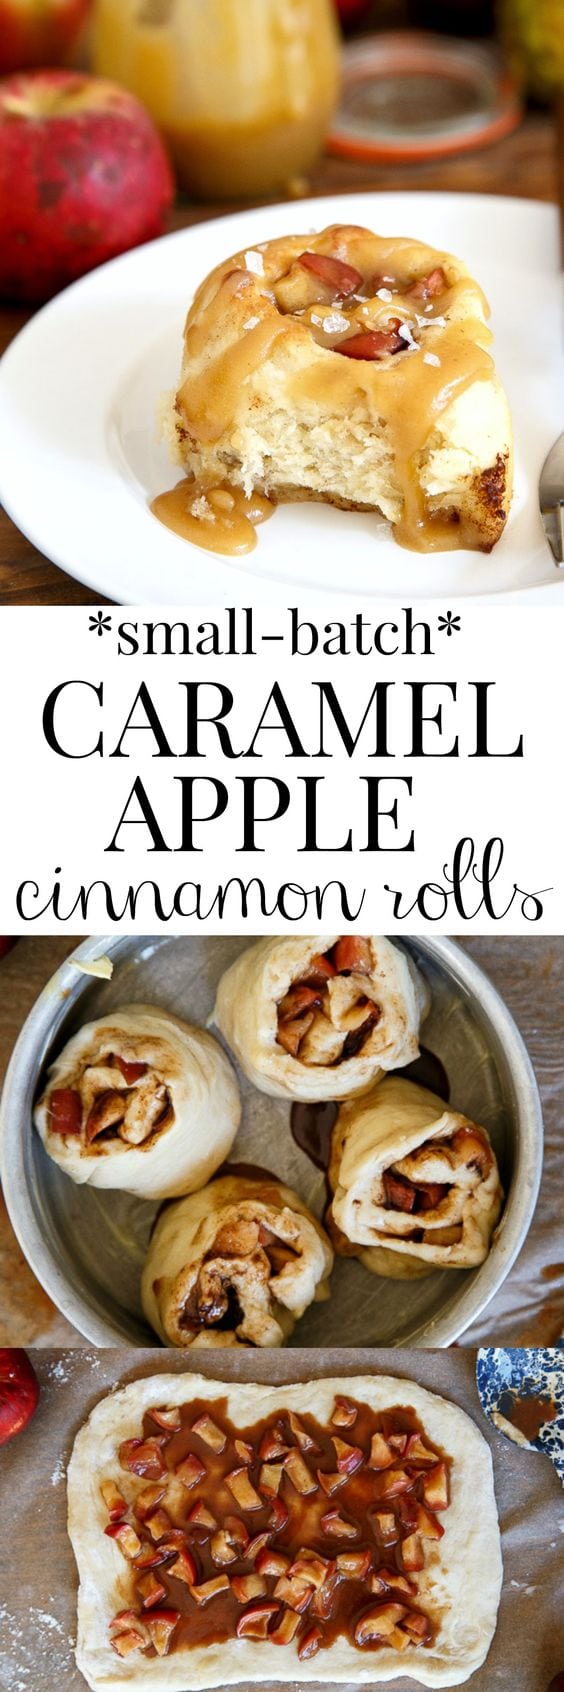 Caramel apple cinnamon rolls for two. A small batch cinnamon roll recipe made with fresh apples and a quick and easy homemade salted caramel sauce. Recipe makes just 4 cinnamon rolls!